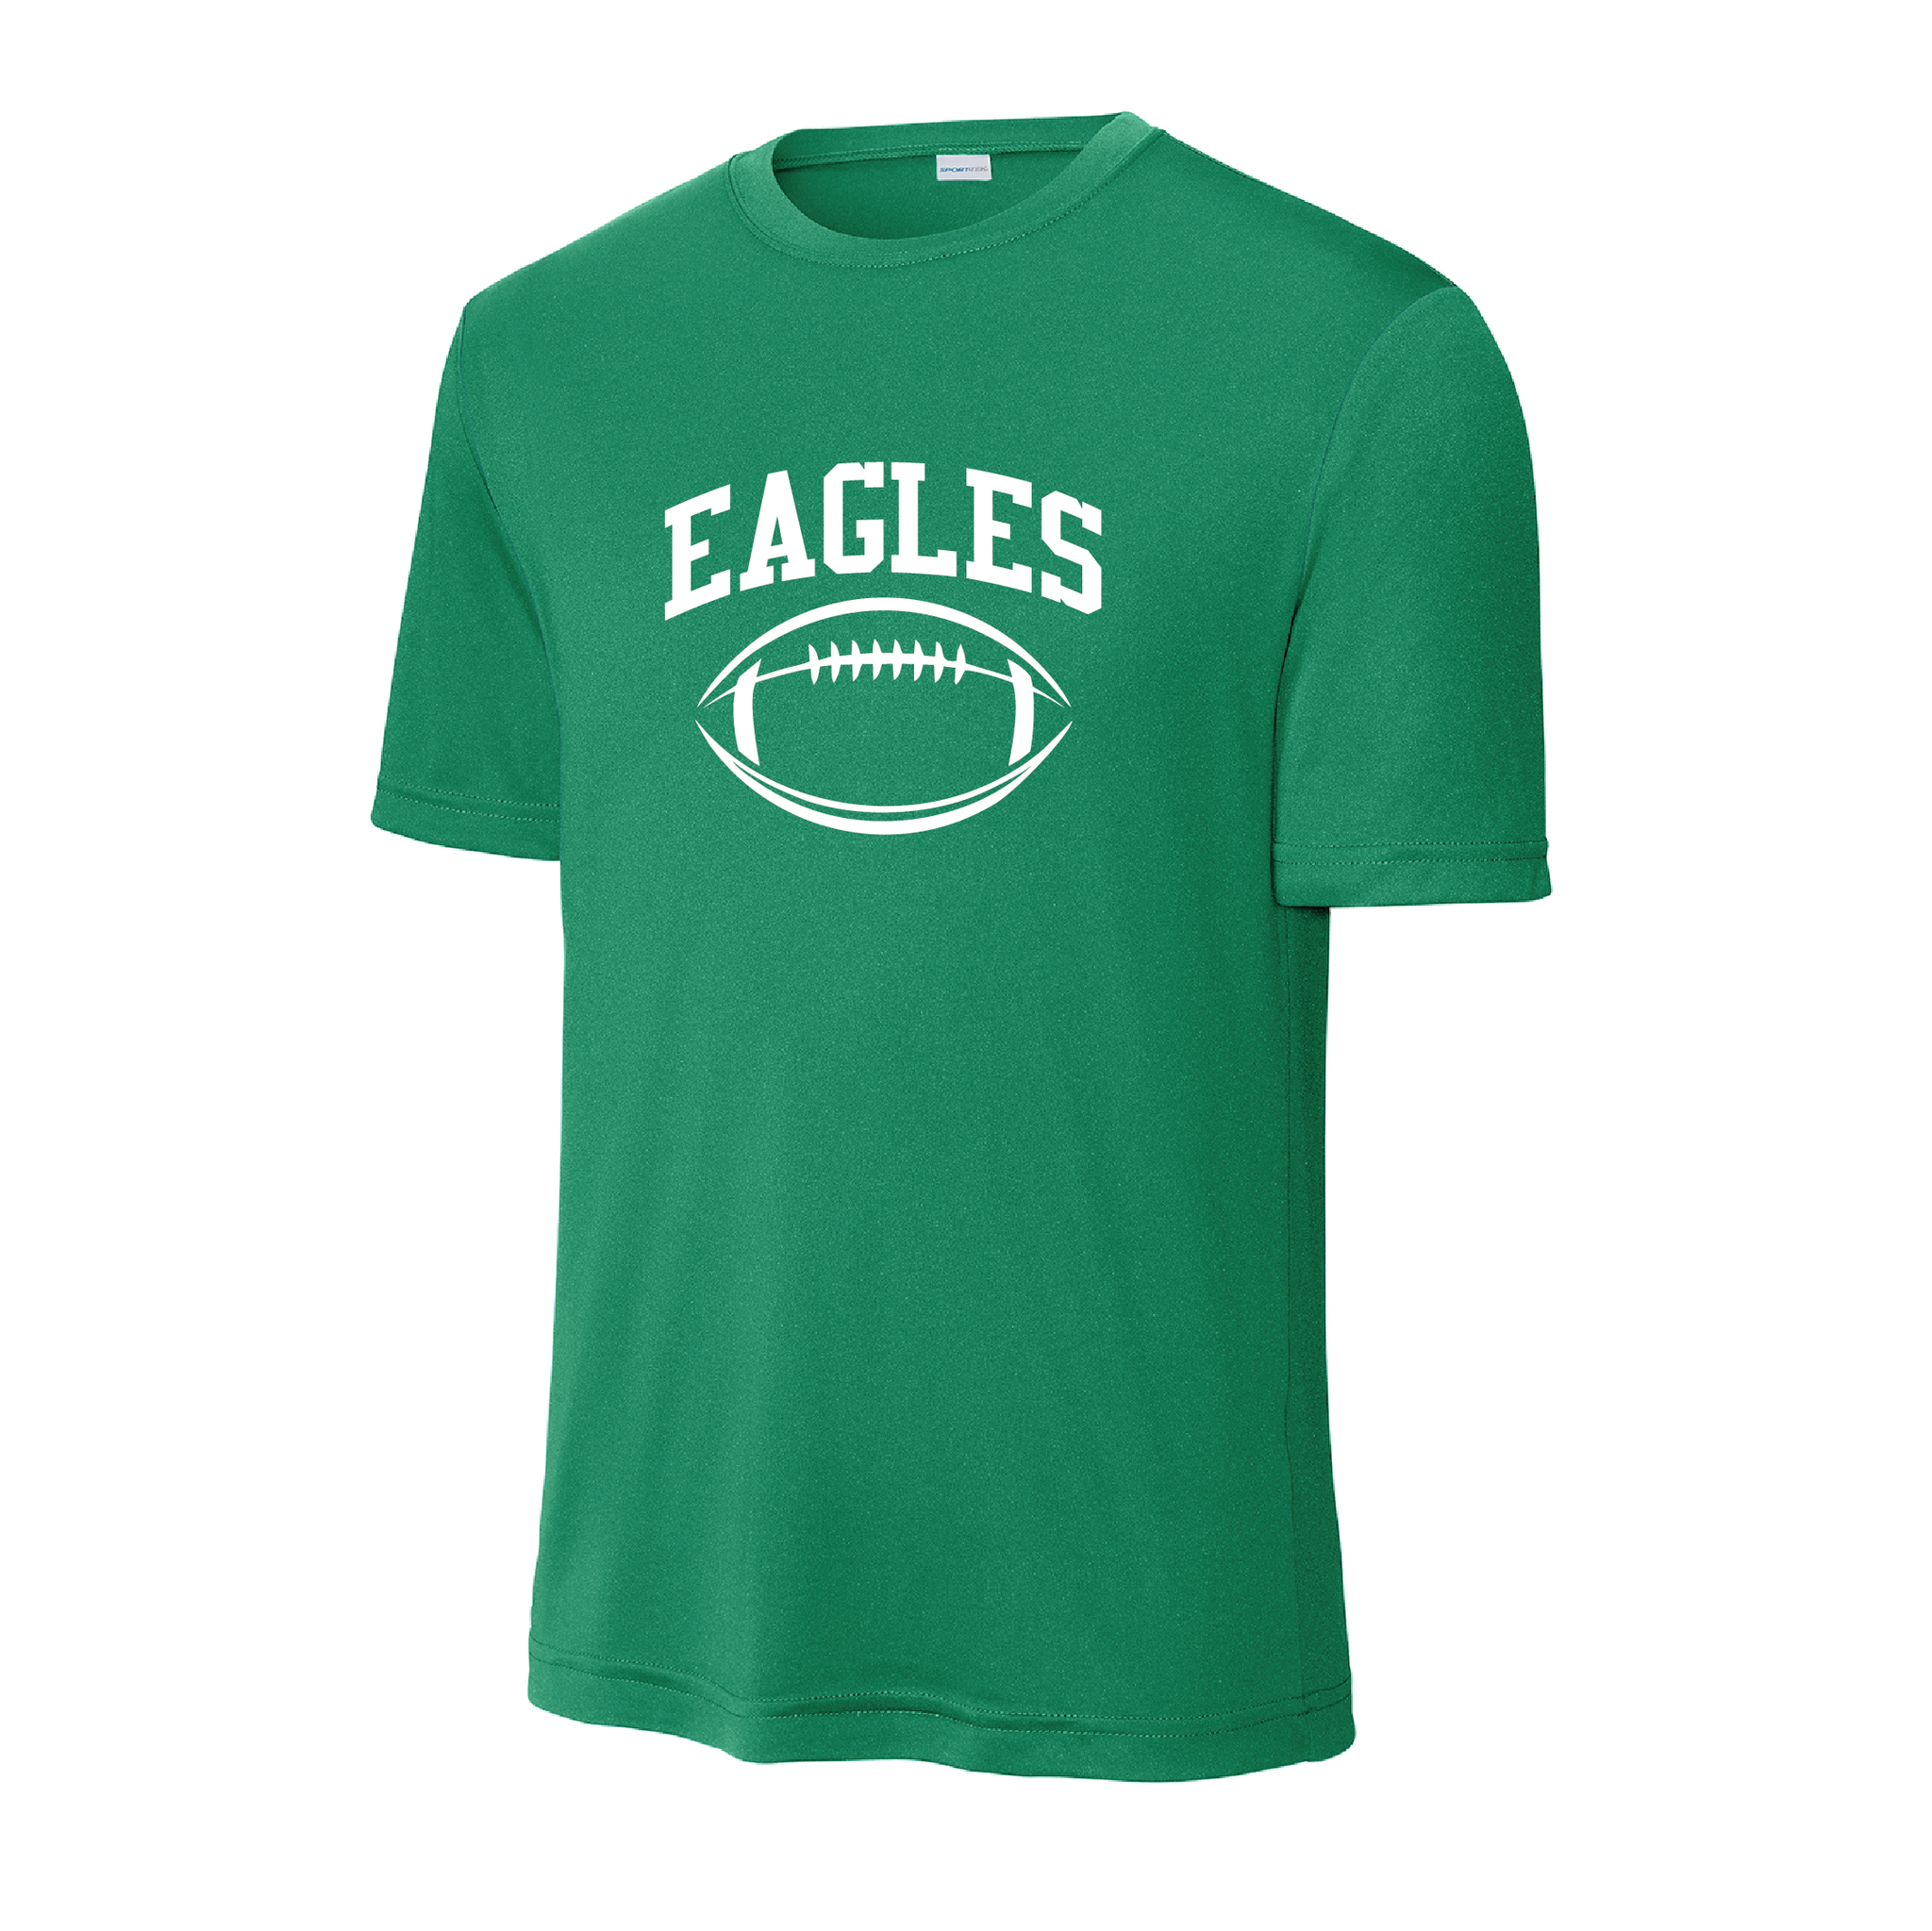 Eagle Youth Football Dry-Fit Shirt